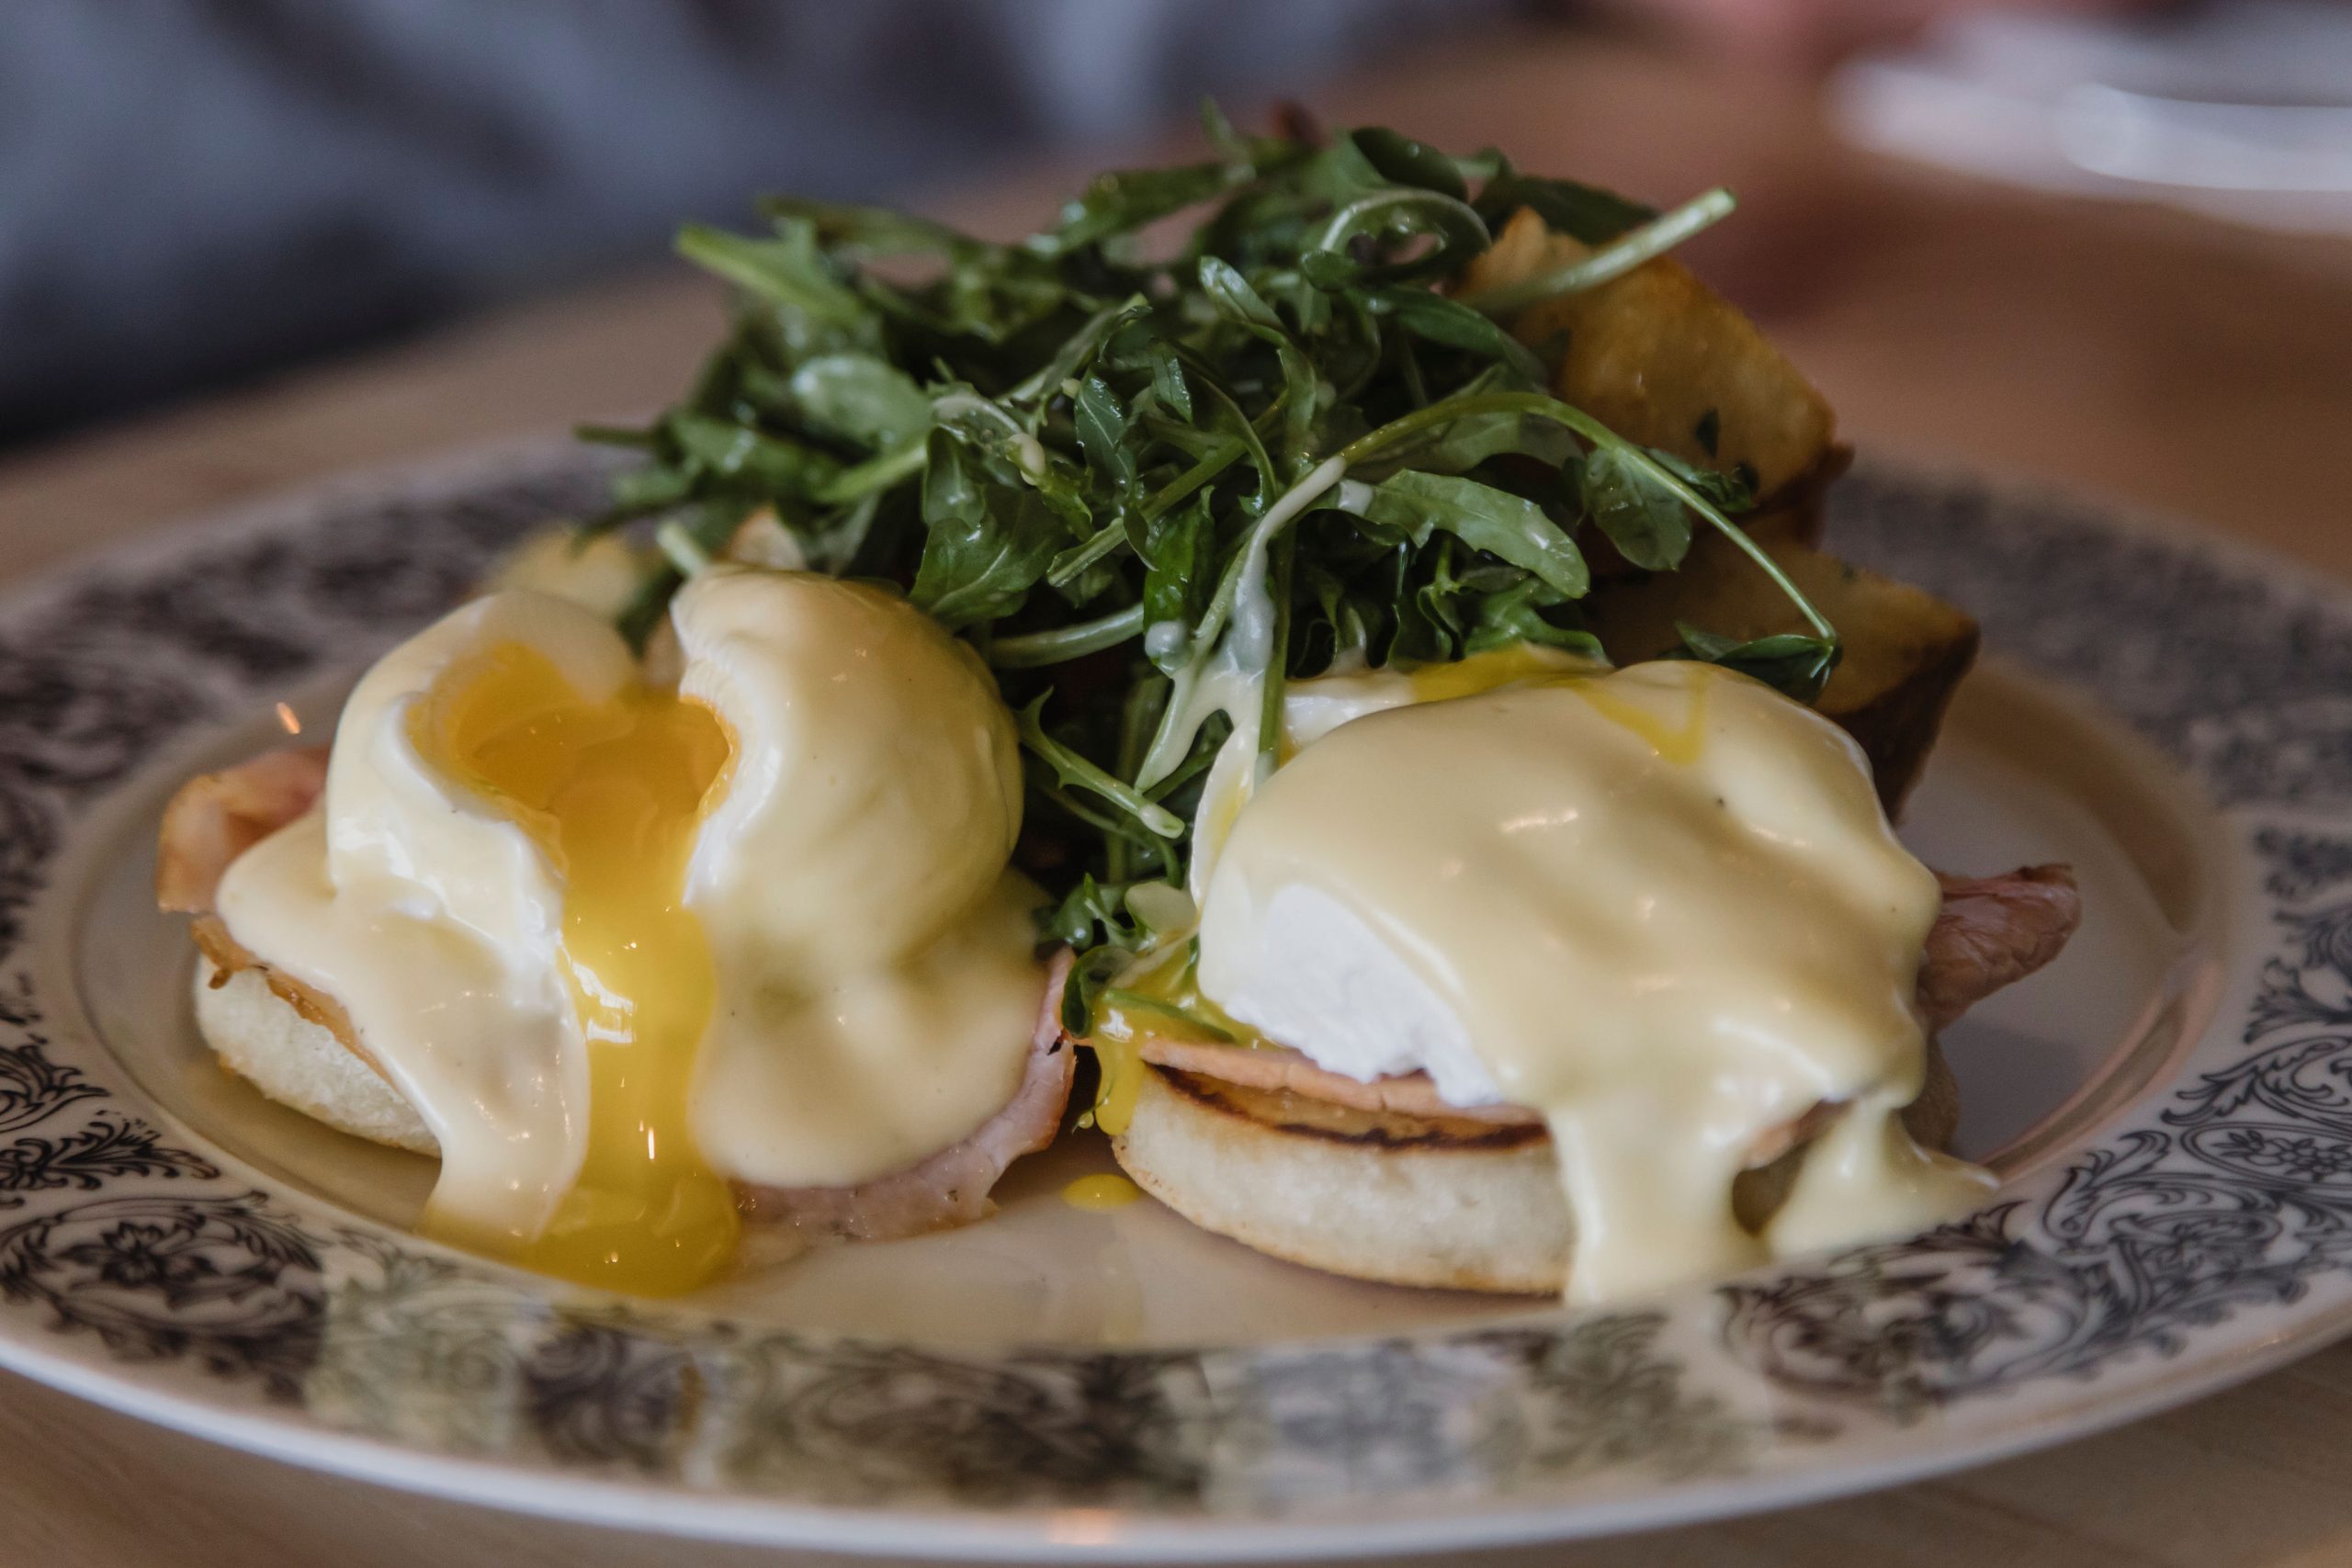 Eggs benedict with soft yolk and hollandaise sauce, topped with arugula